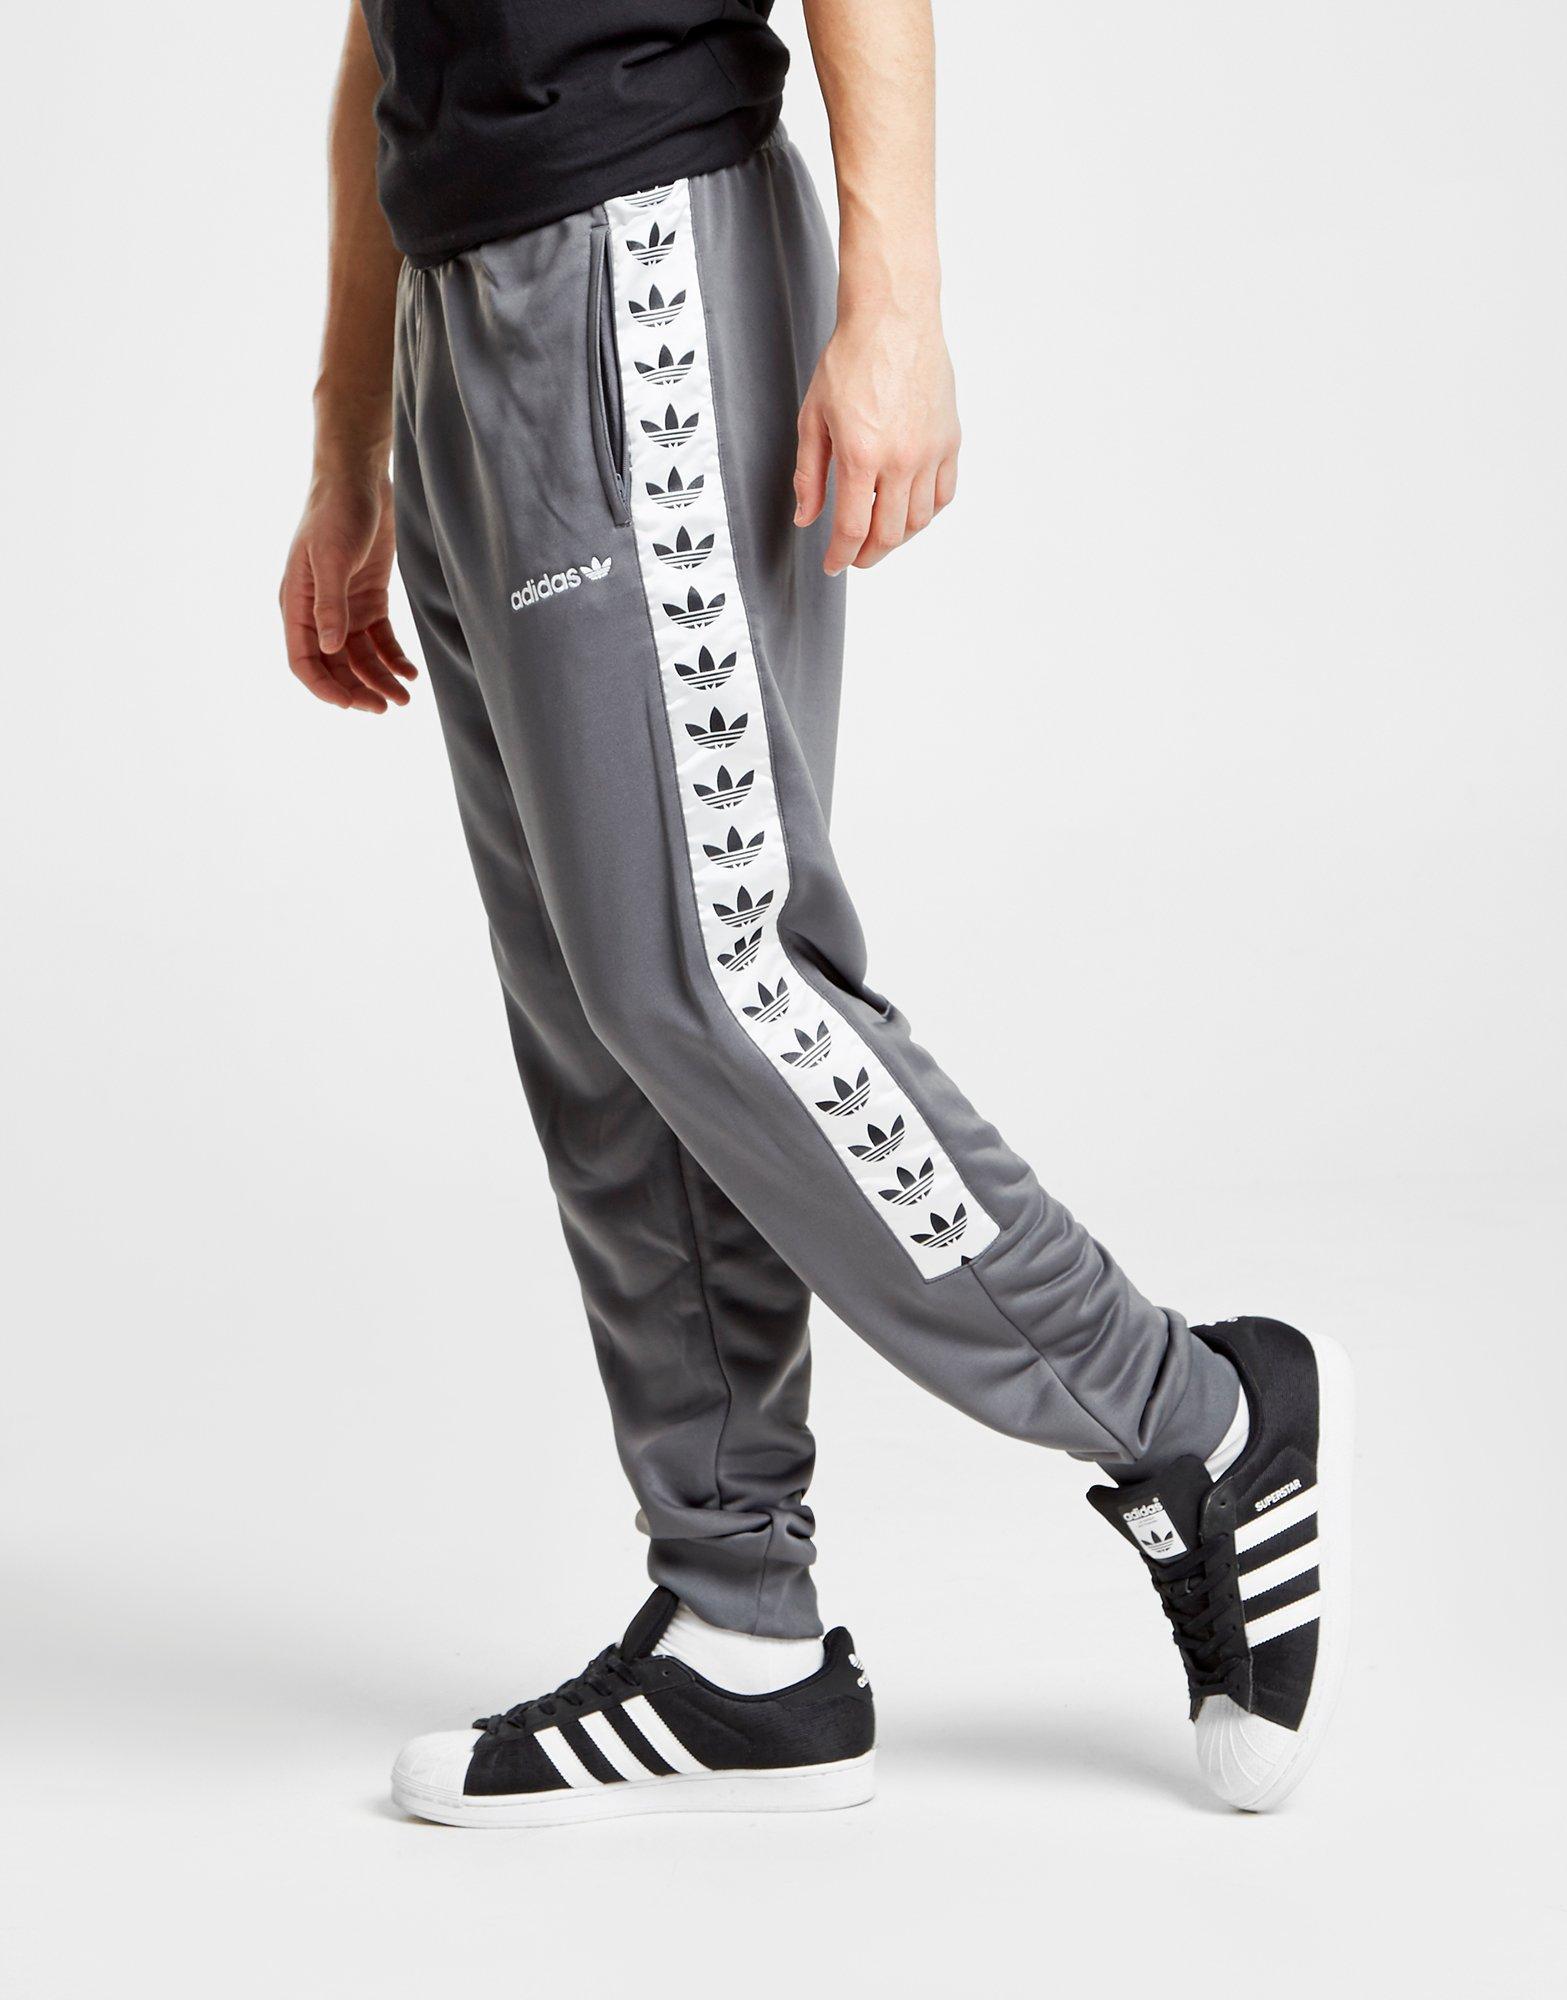 Adidas Taped Poly Track Pants SAVE 54% -